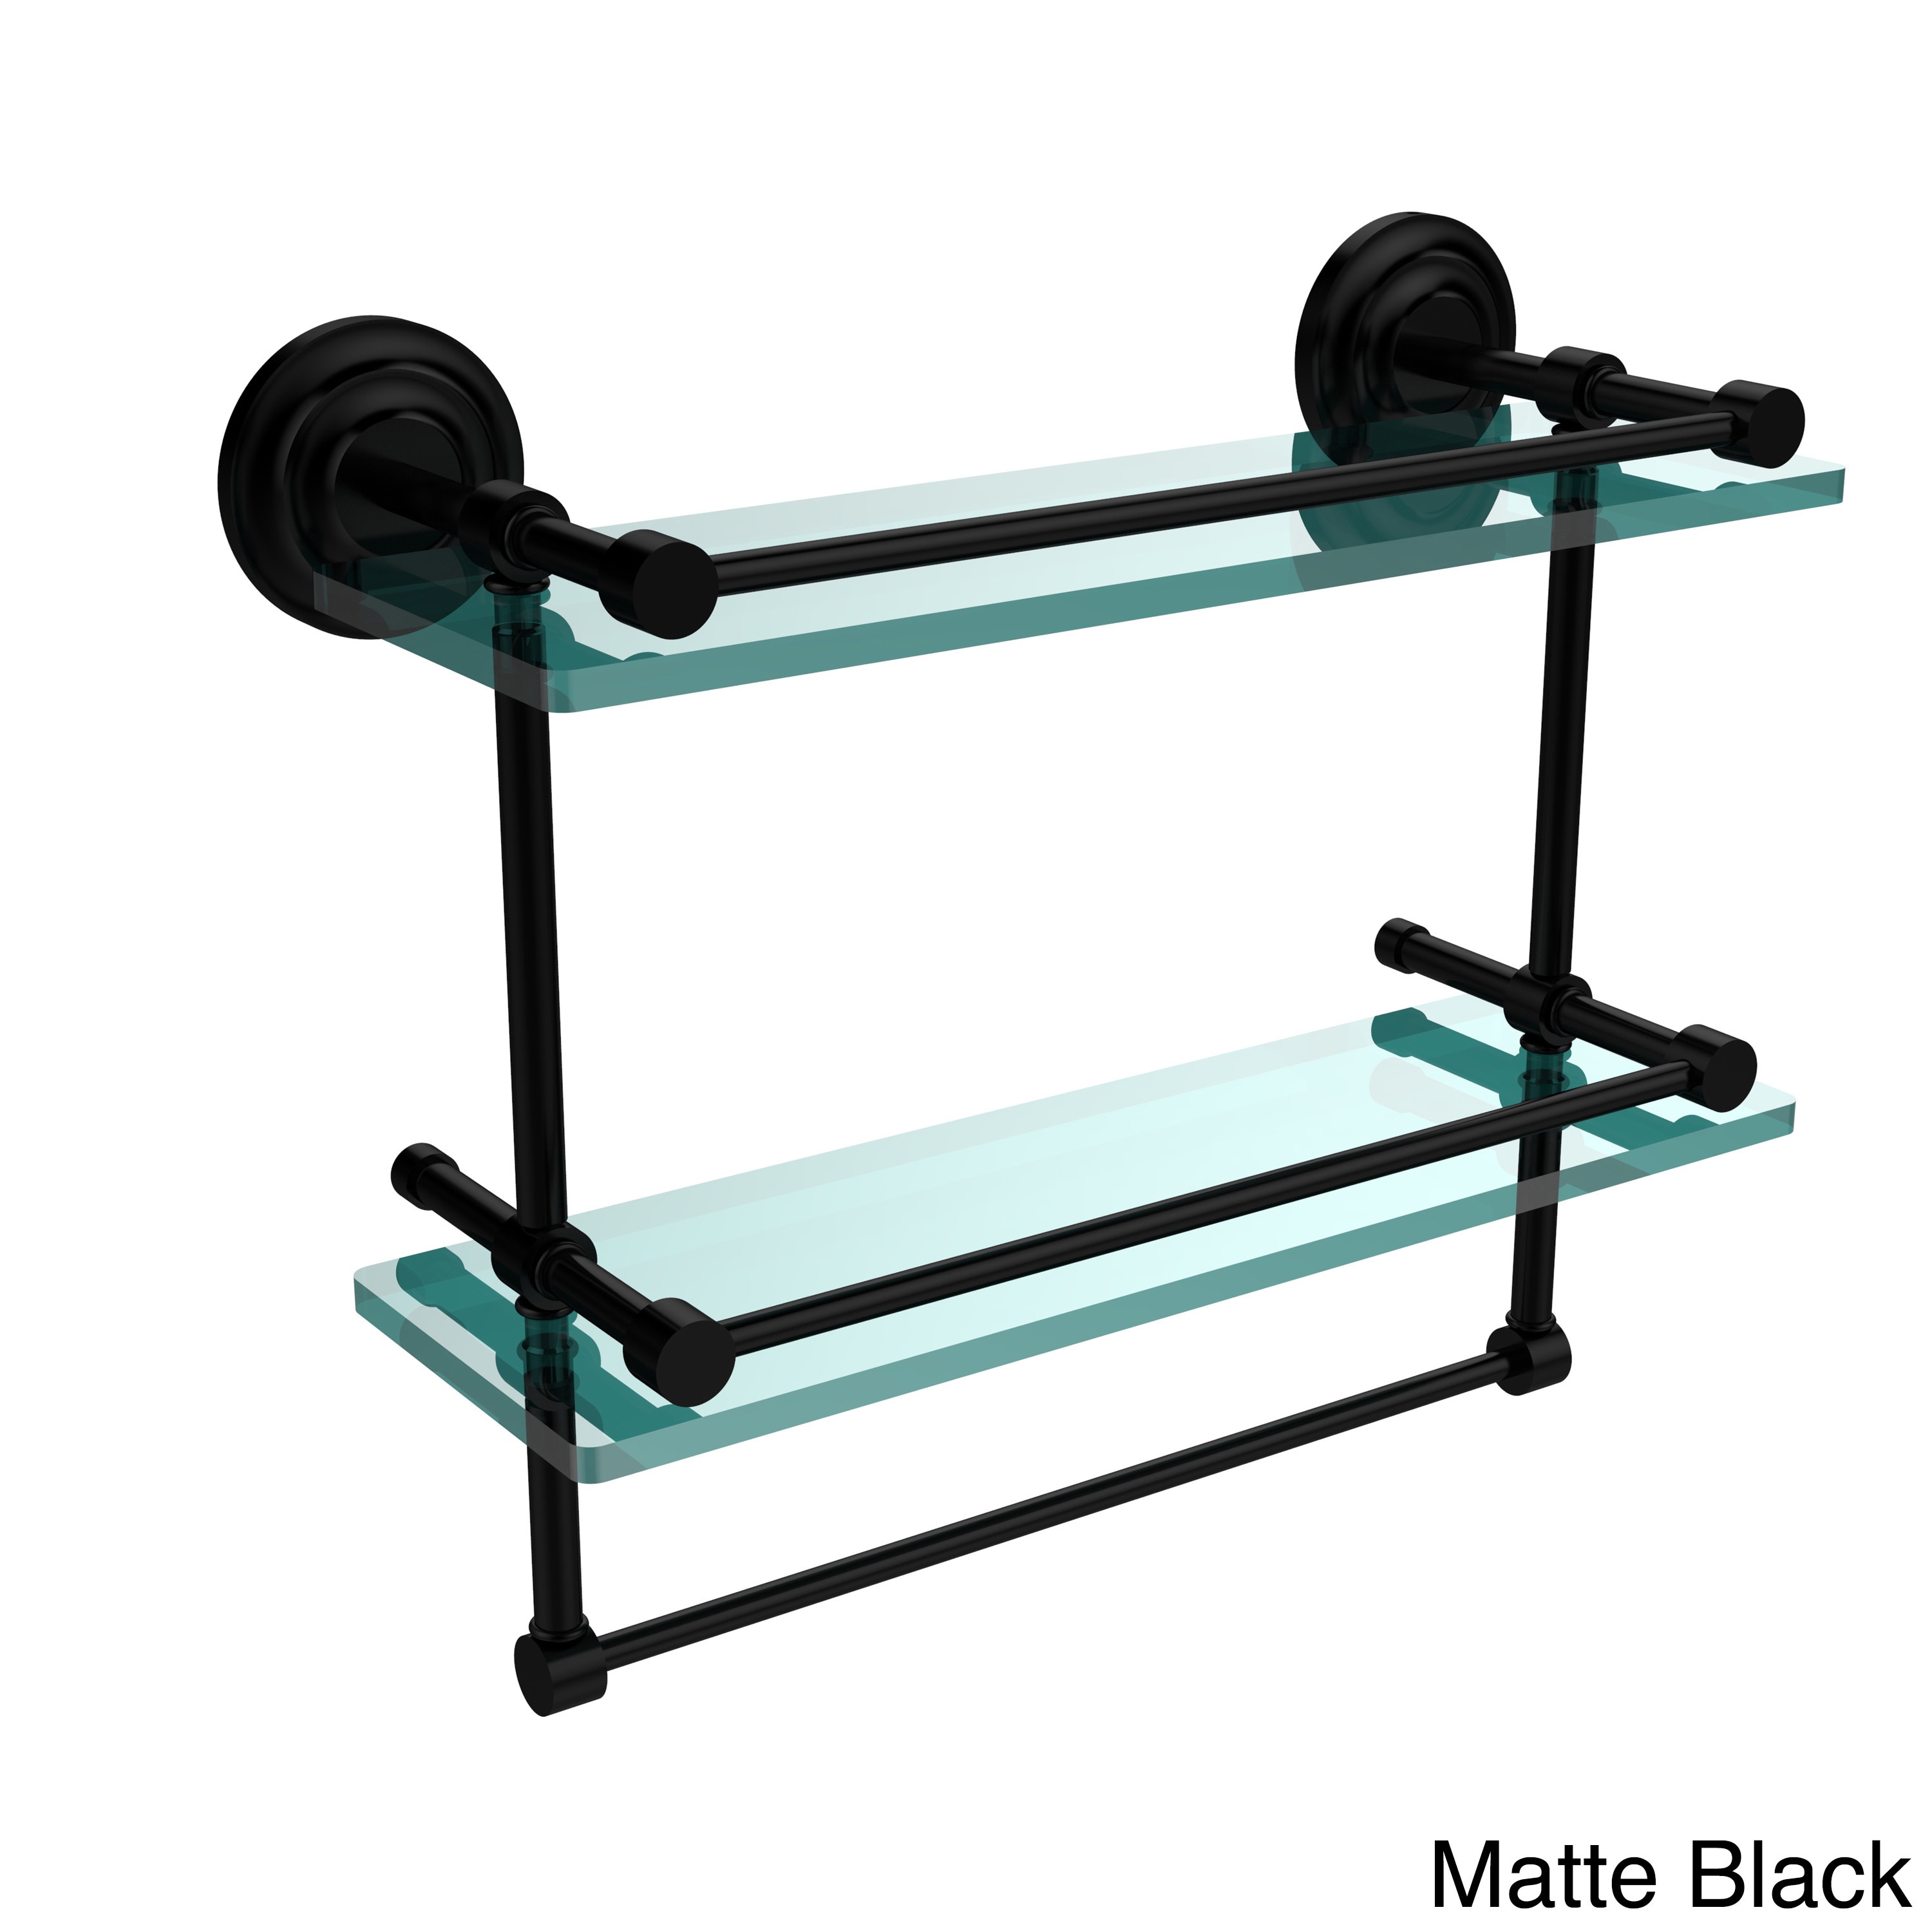 16-in Gallery Double Glass Shelf with Towel Bar in Satin Chrome - image 5 of 5